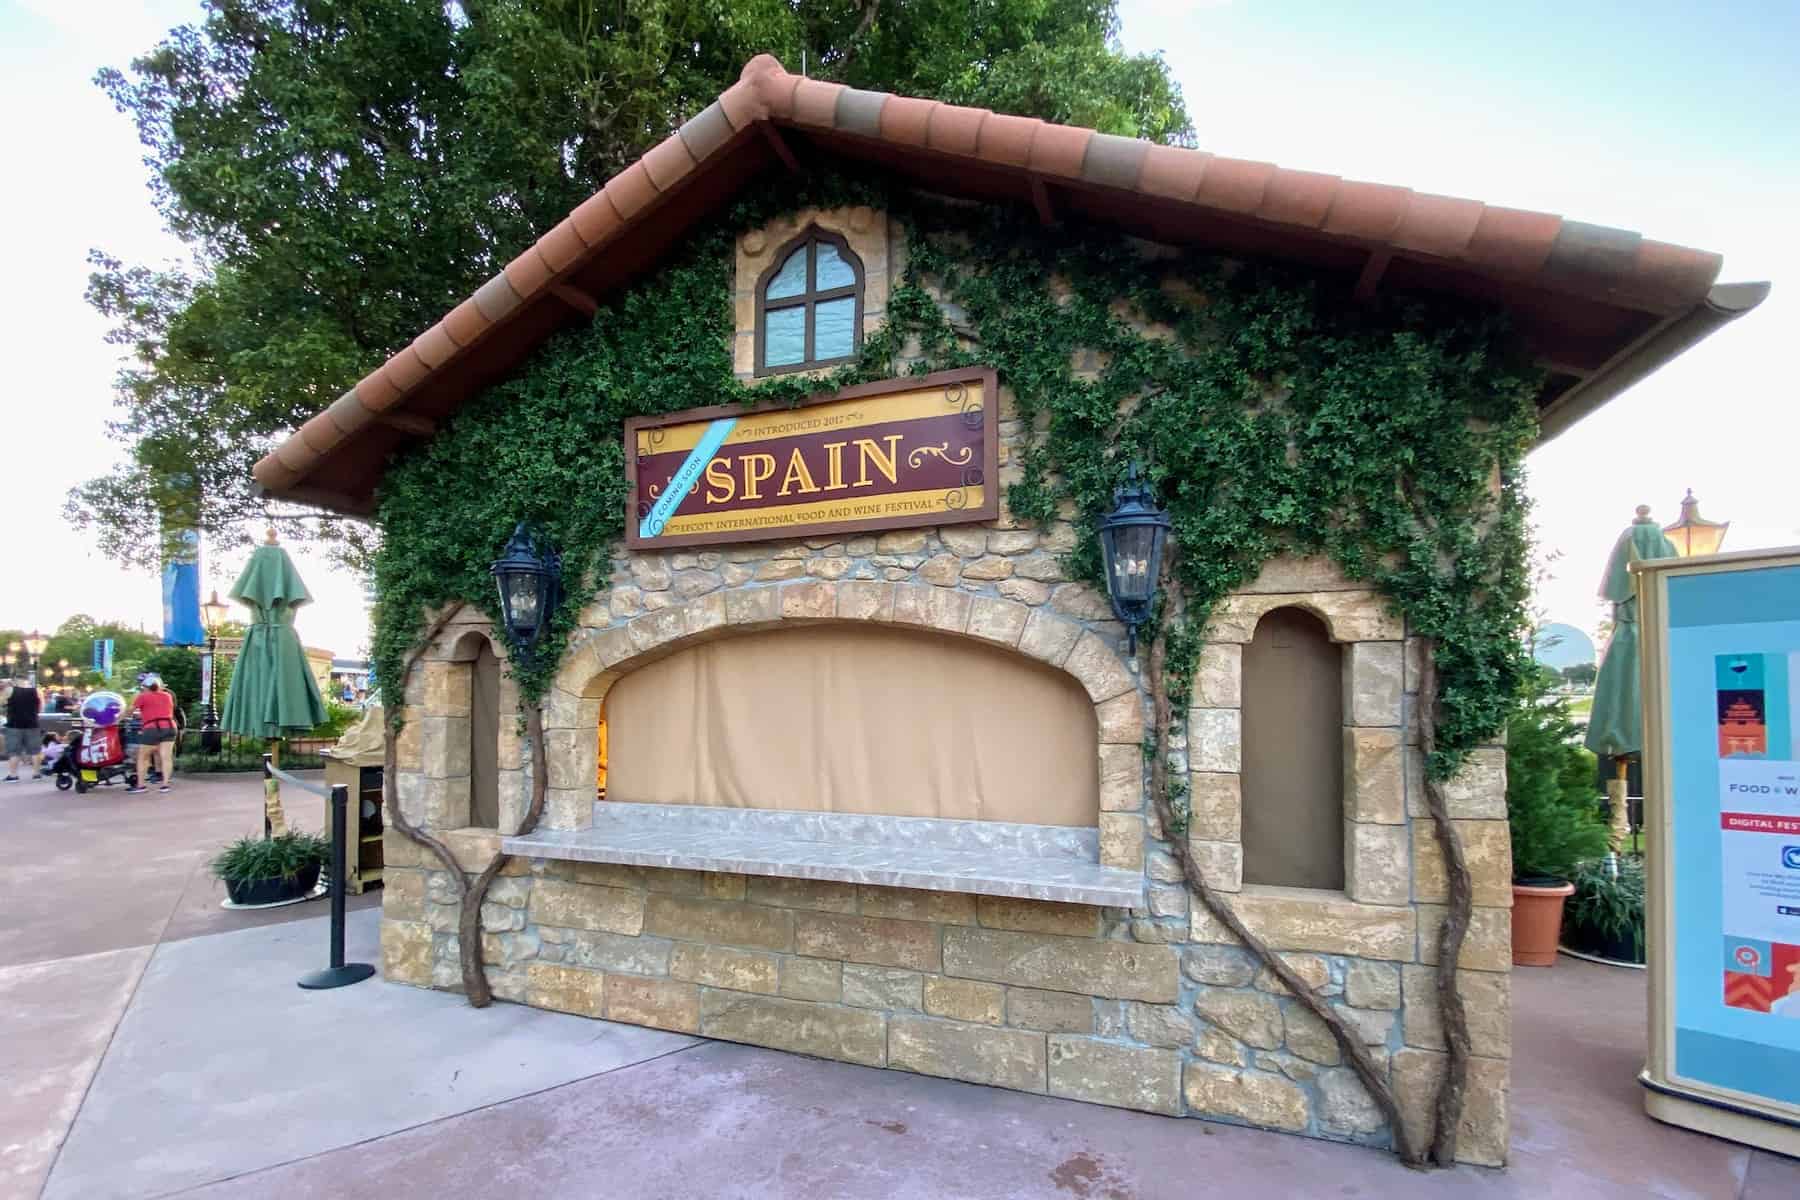 Spain Booth Menu & Review (2021 Epcot Food & Wine Festival)